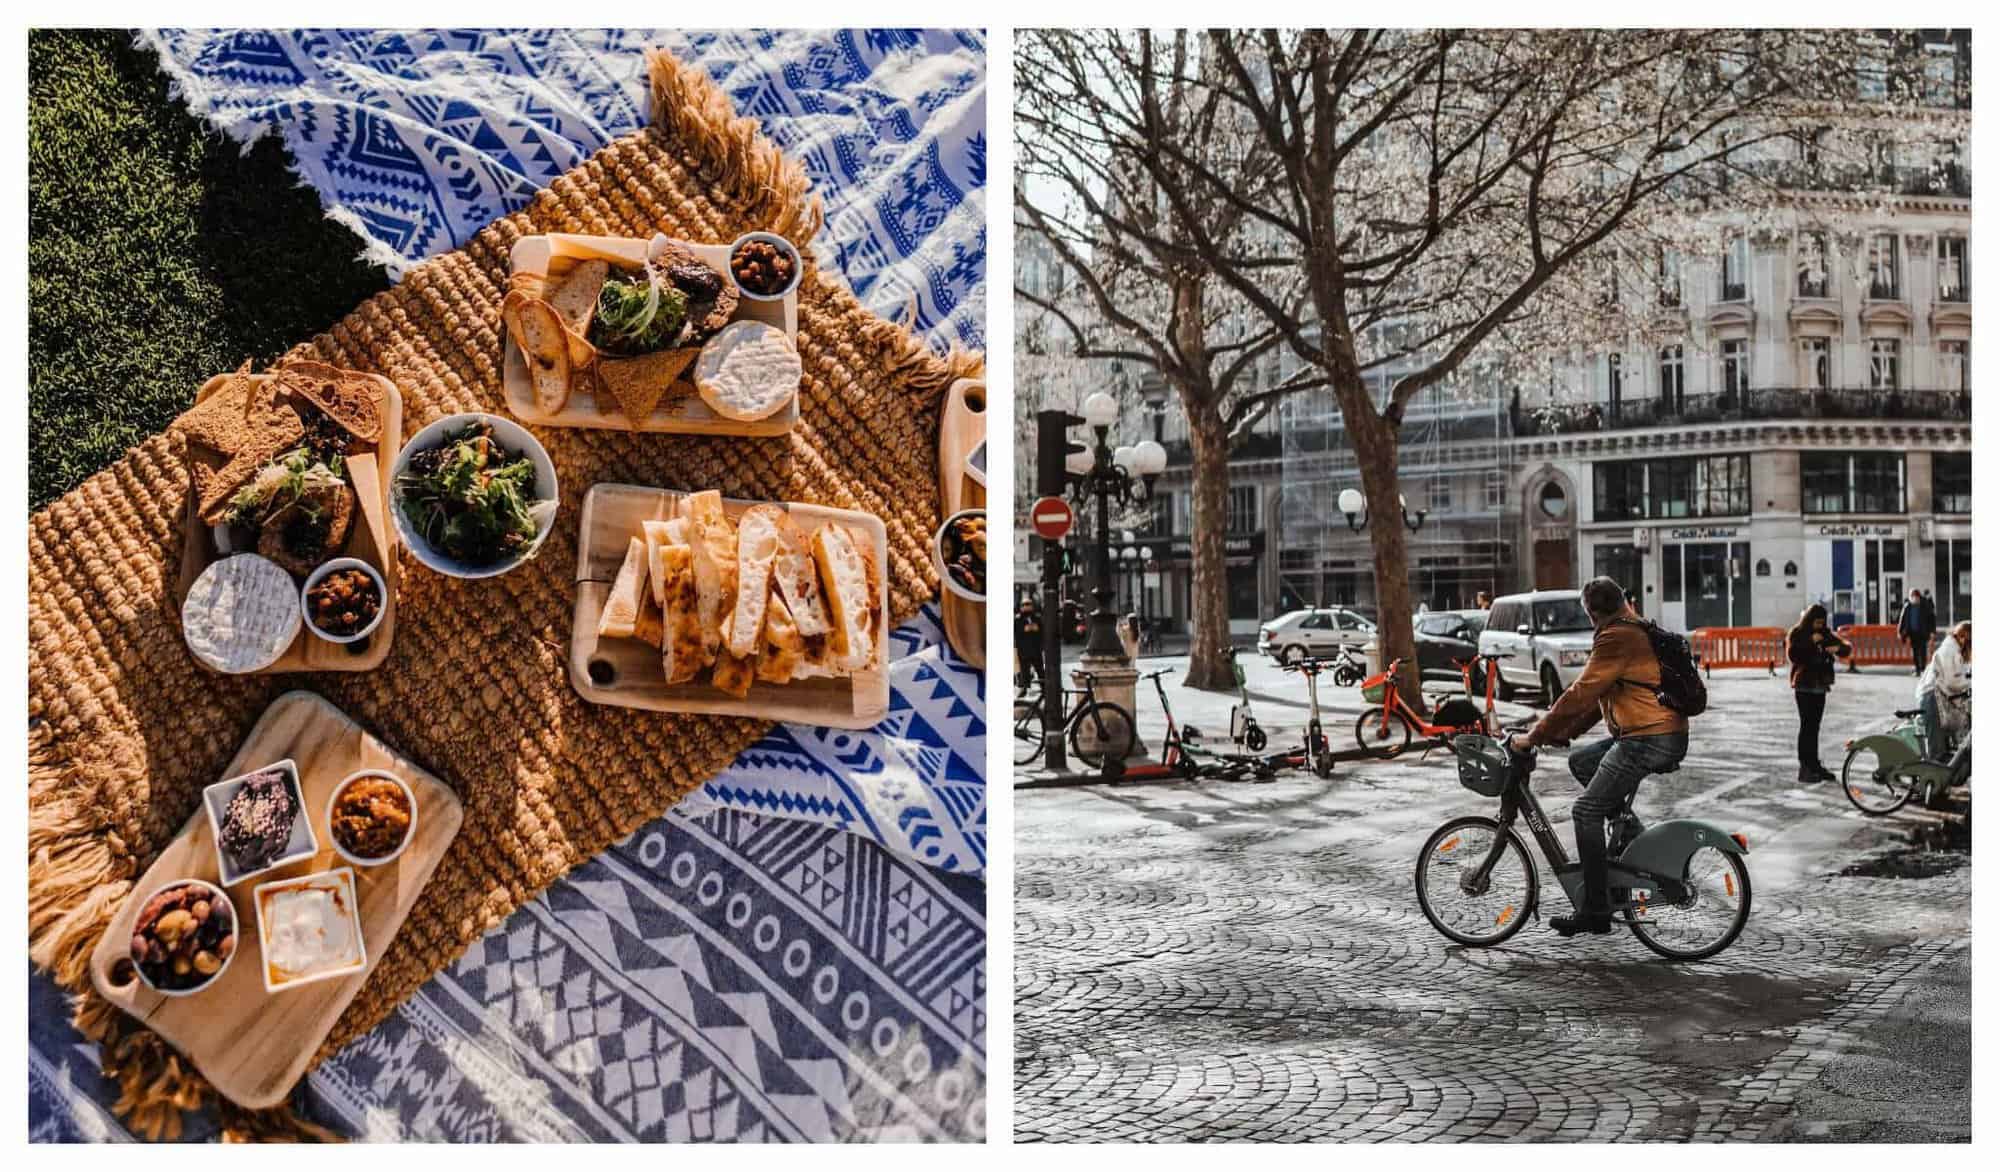 Left: A picnic blanket with cheese, bread and drinks. Right: A man bikes in a Paris street.